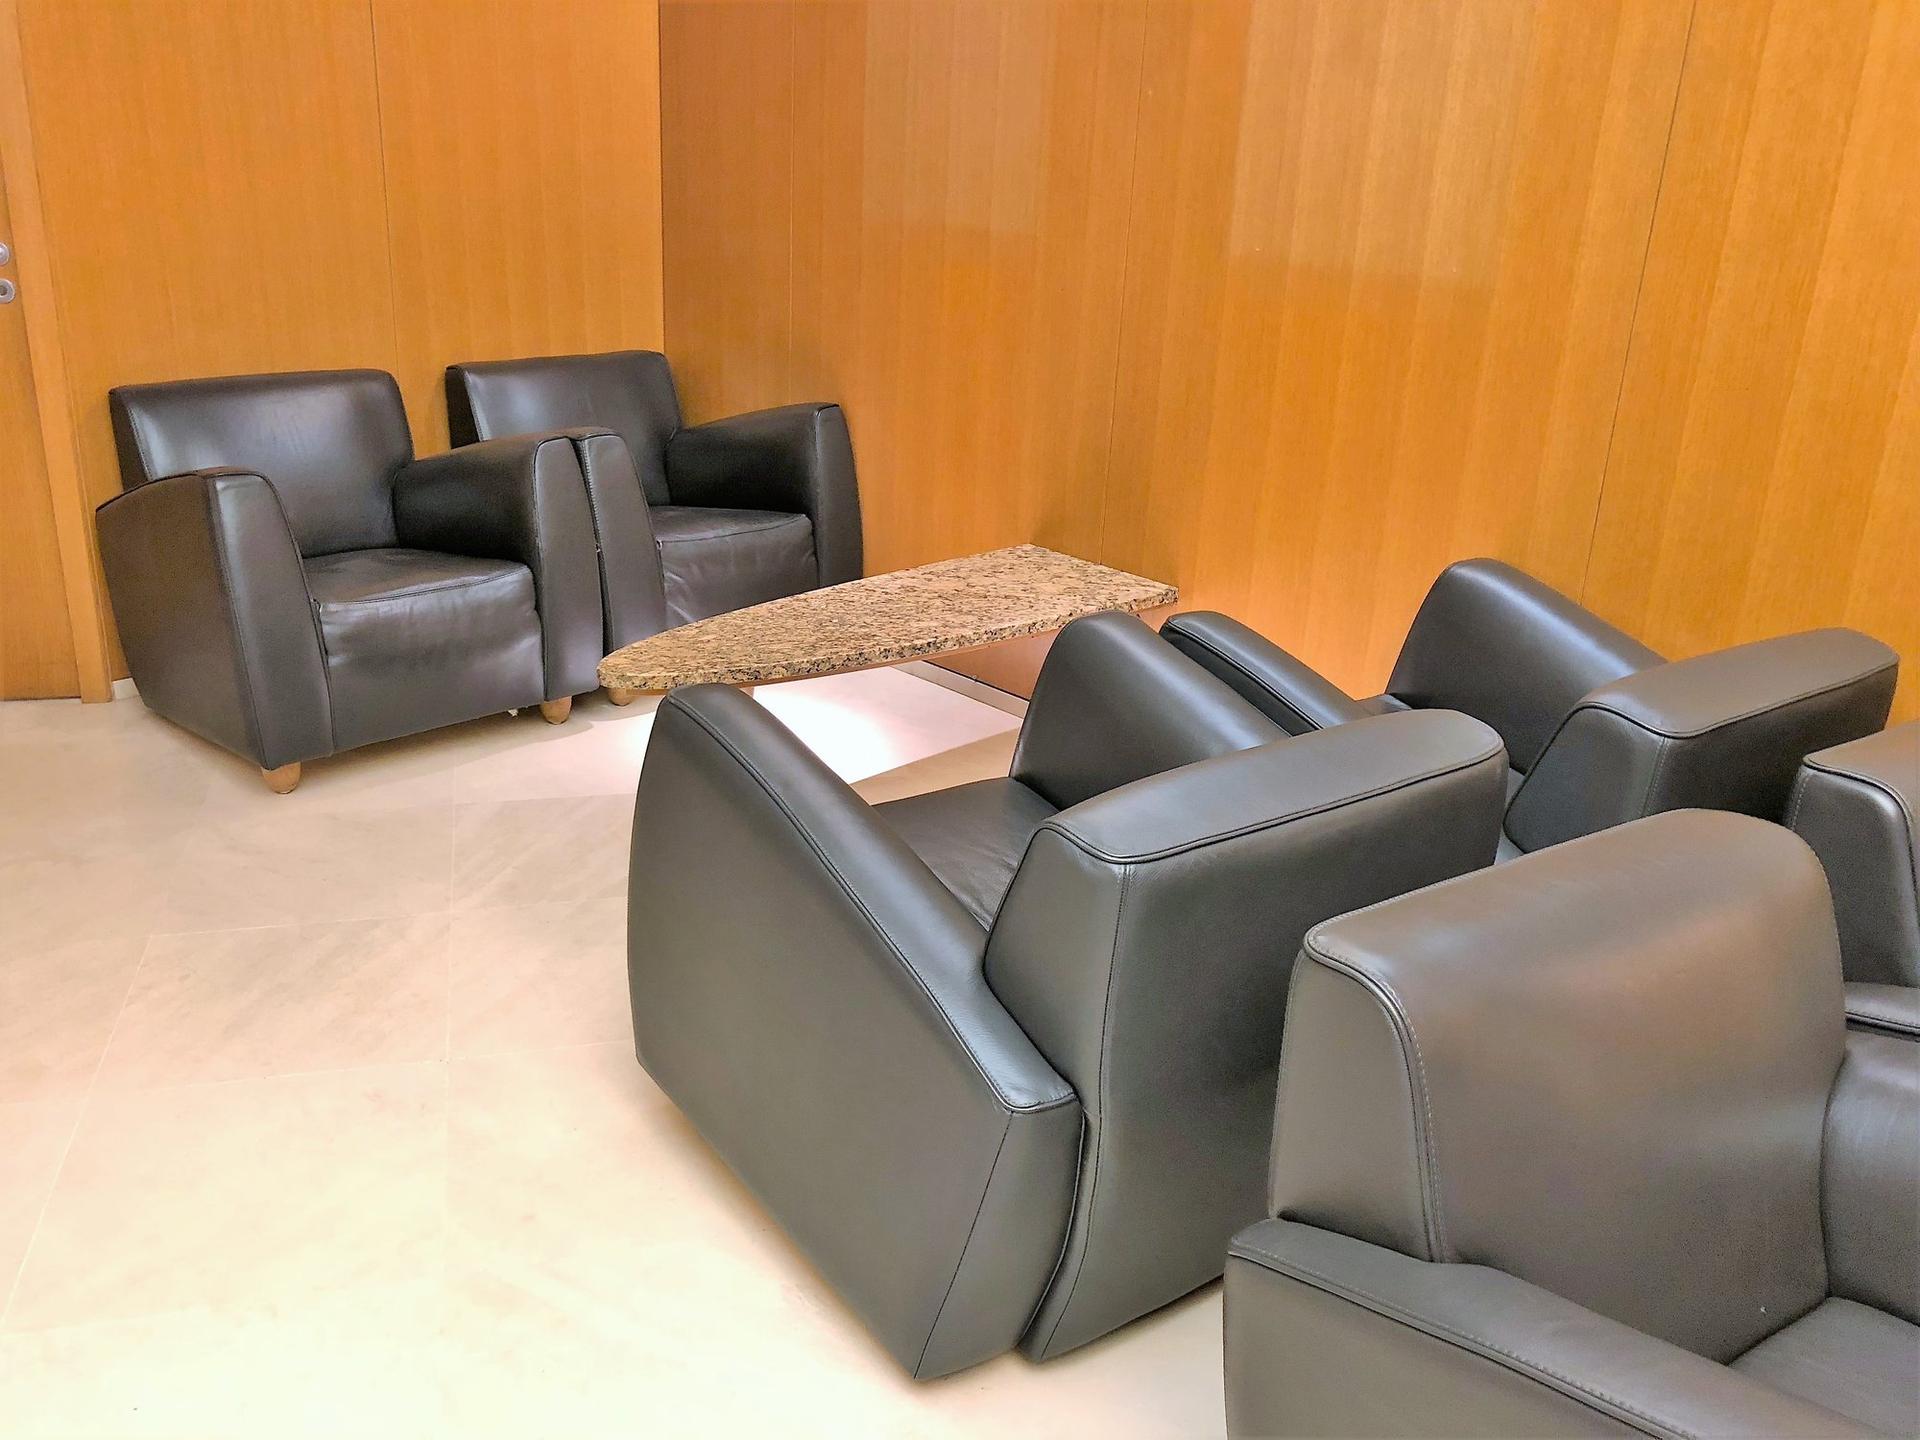 Air Canada Maple Leaf Lounge image 46 of 64